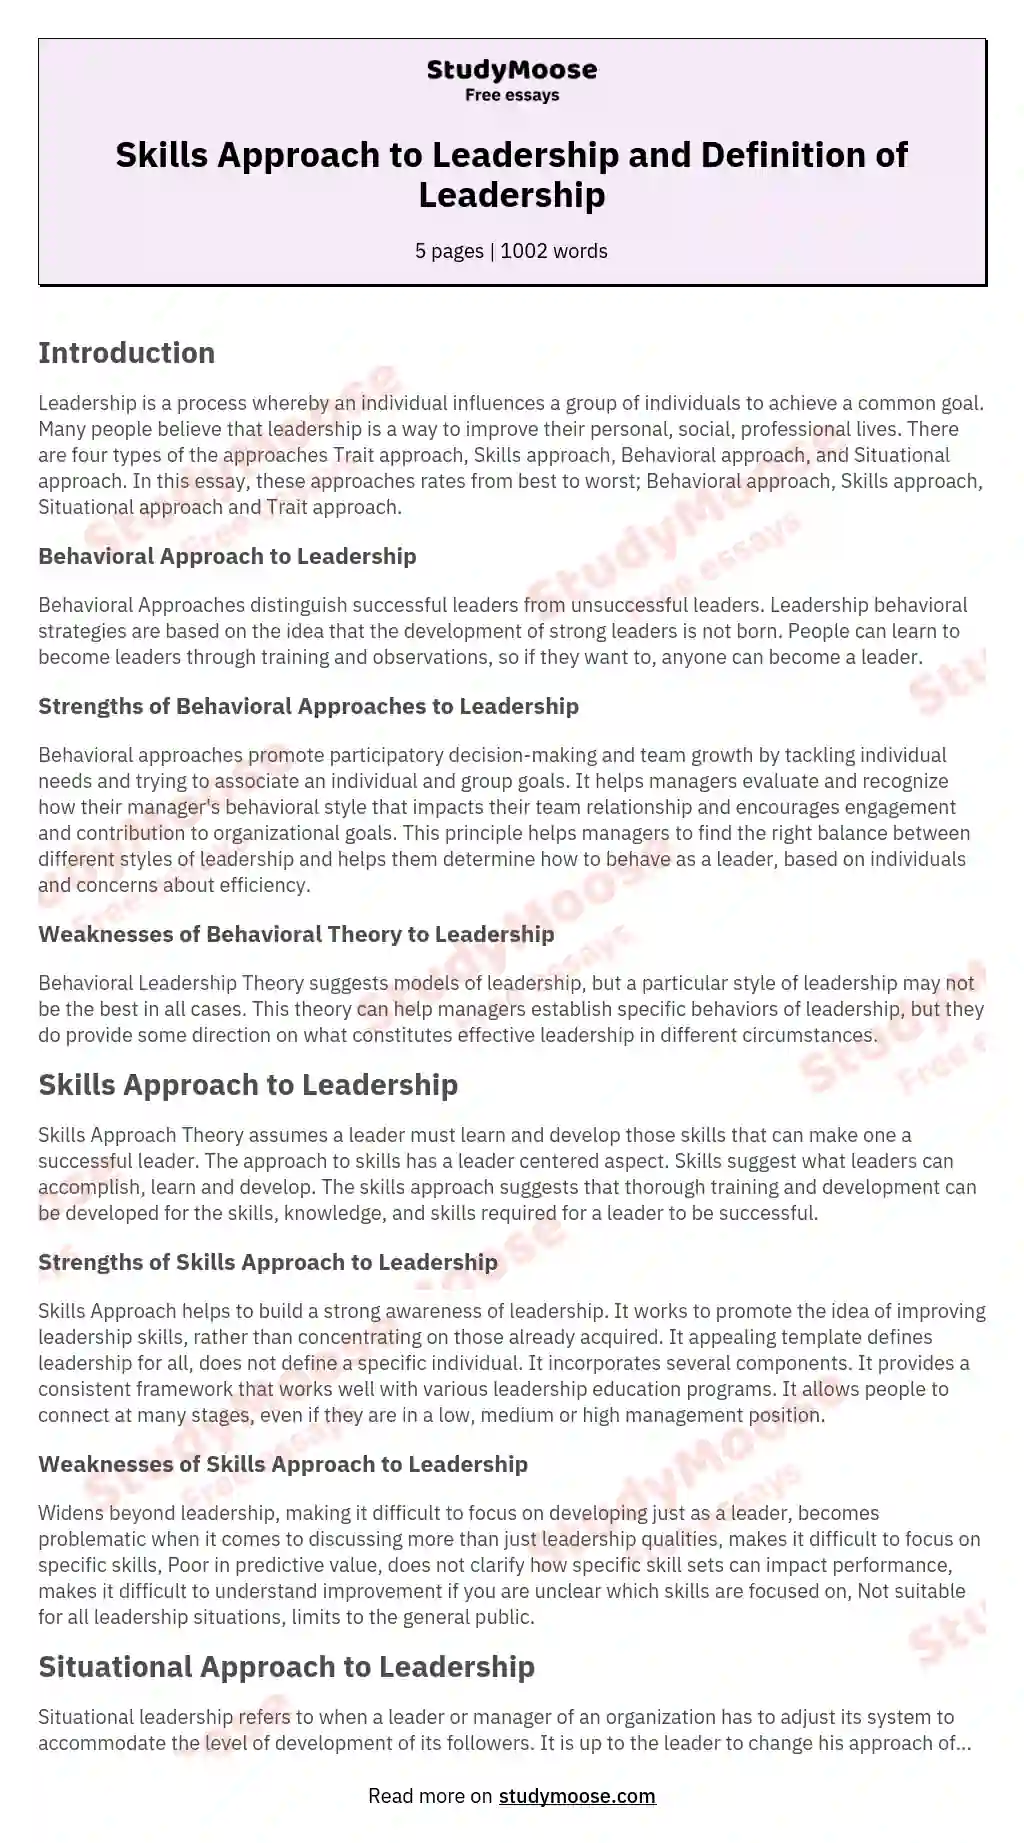 Skills Approach to Leadership and Definition of Leadership